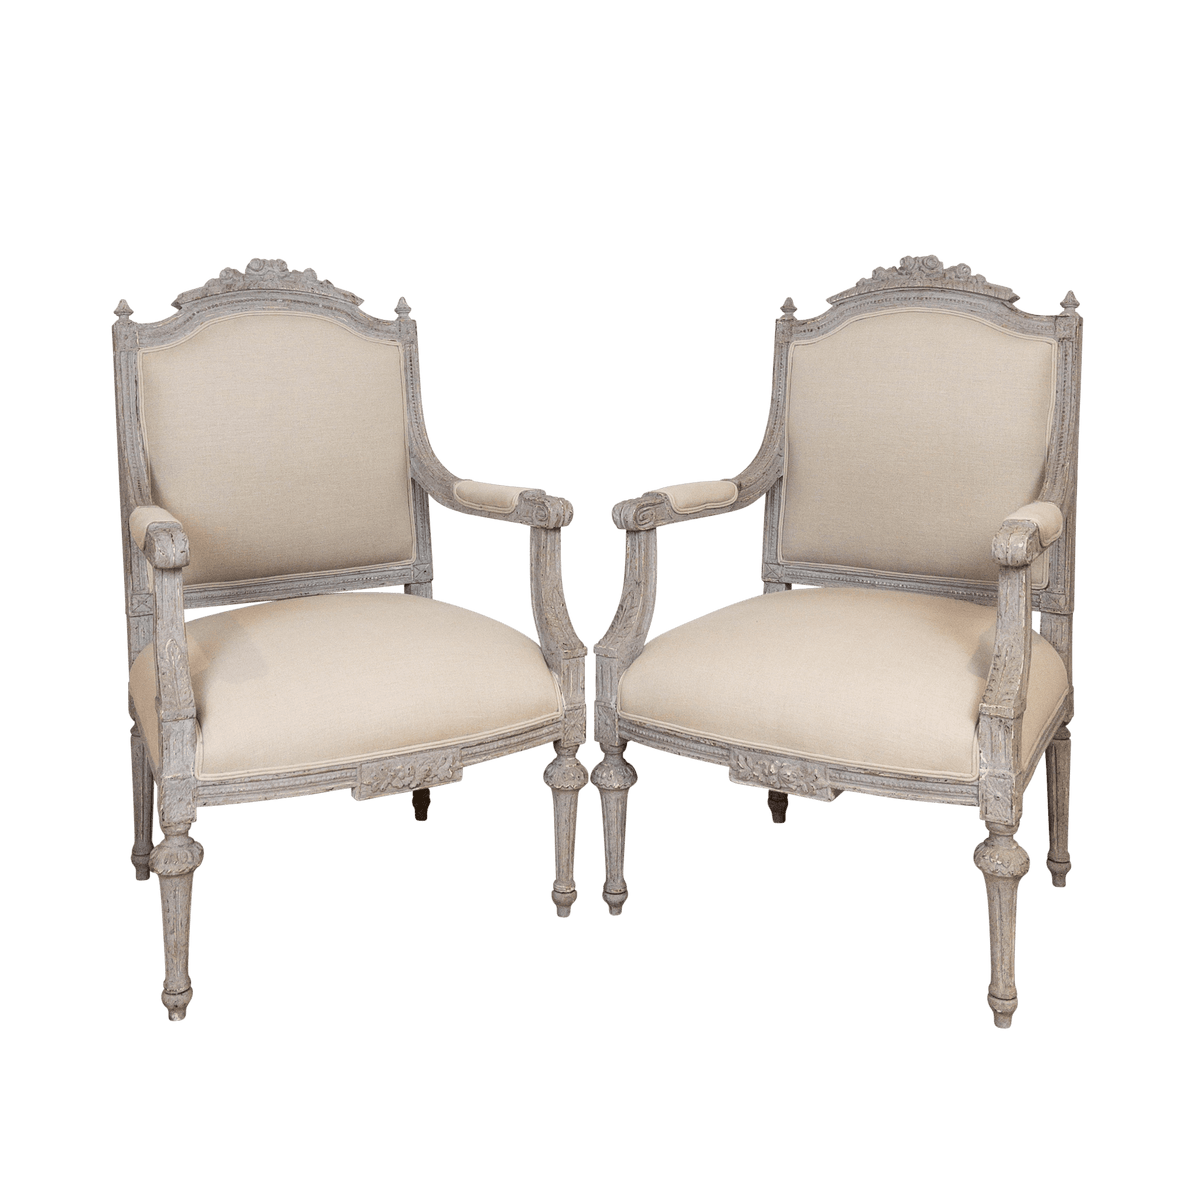 Gustavian Painted Chairs - Pair